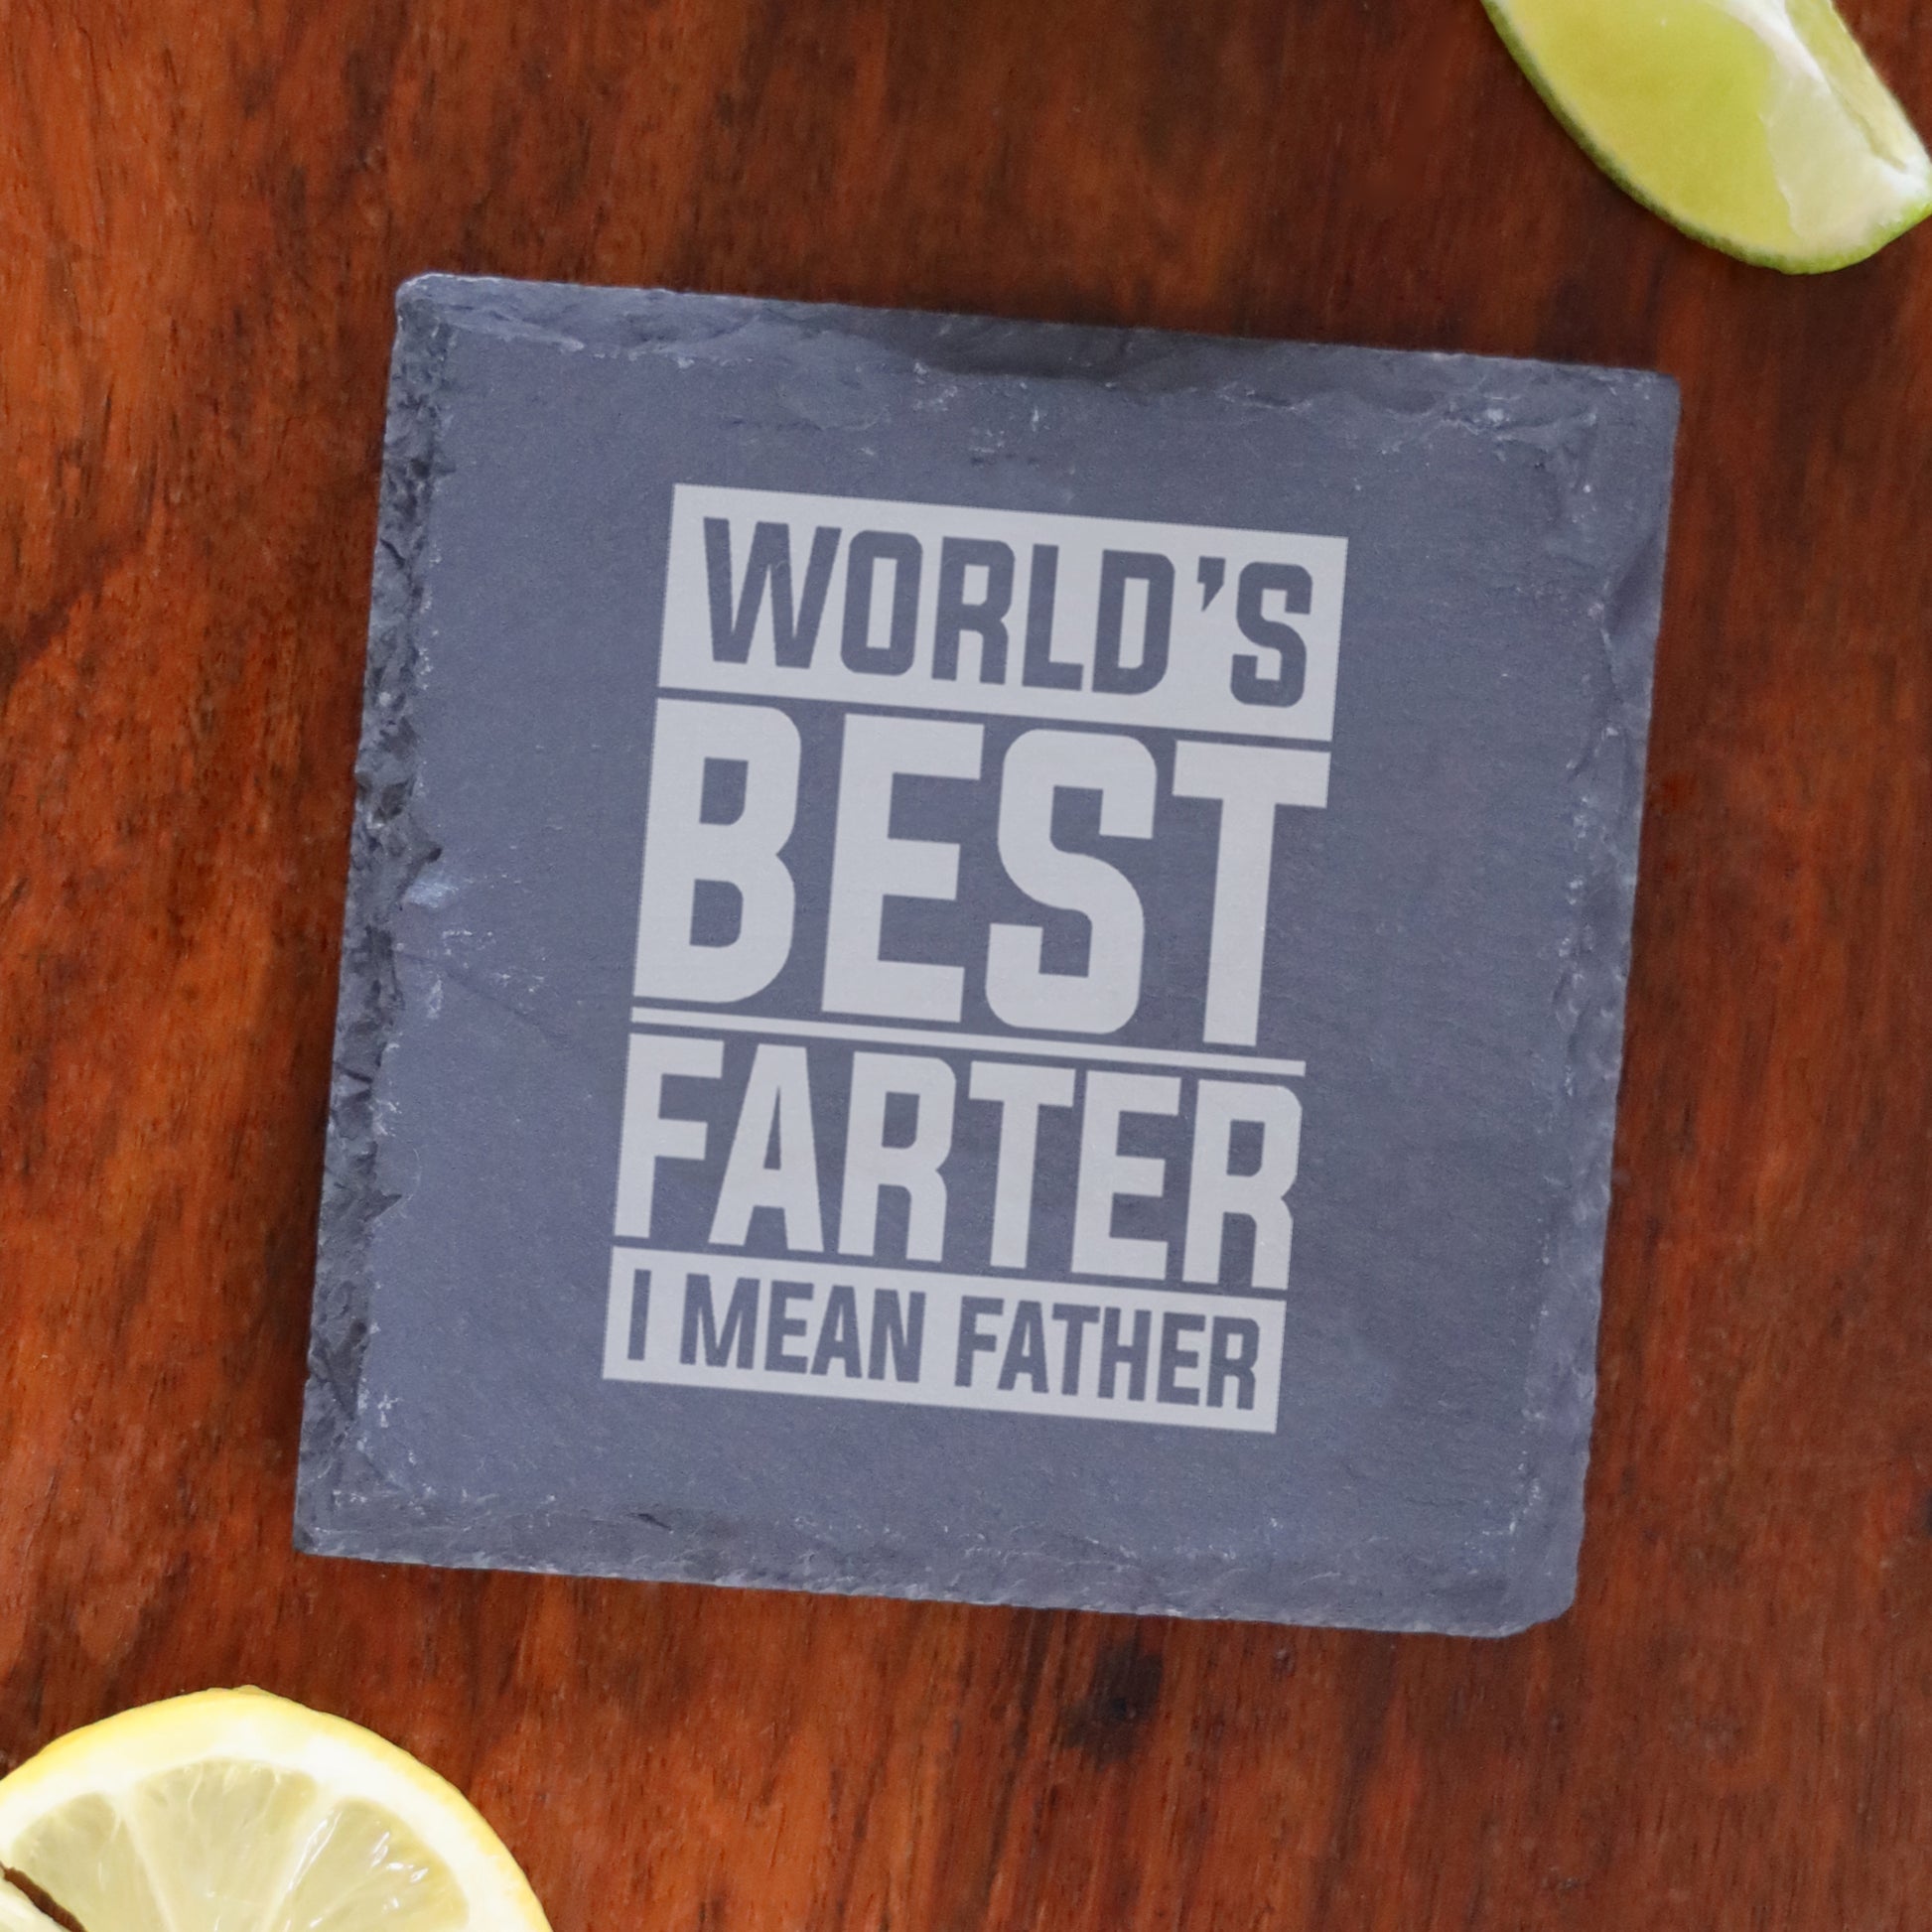 "Worlds Best Farter I Mean Father" Novelty Engraved Whisky Glass and/or Coaster Set  - Always Looking Good - Square Coaster Only  